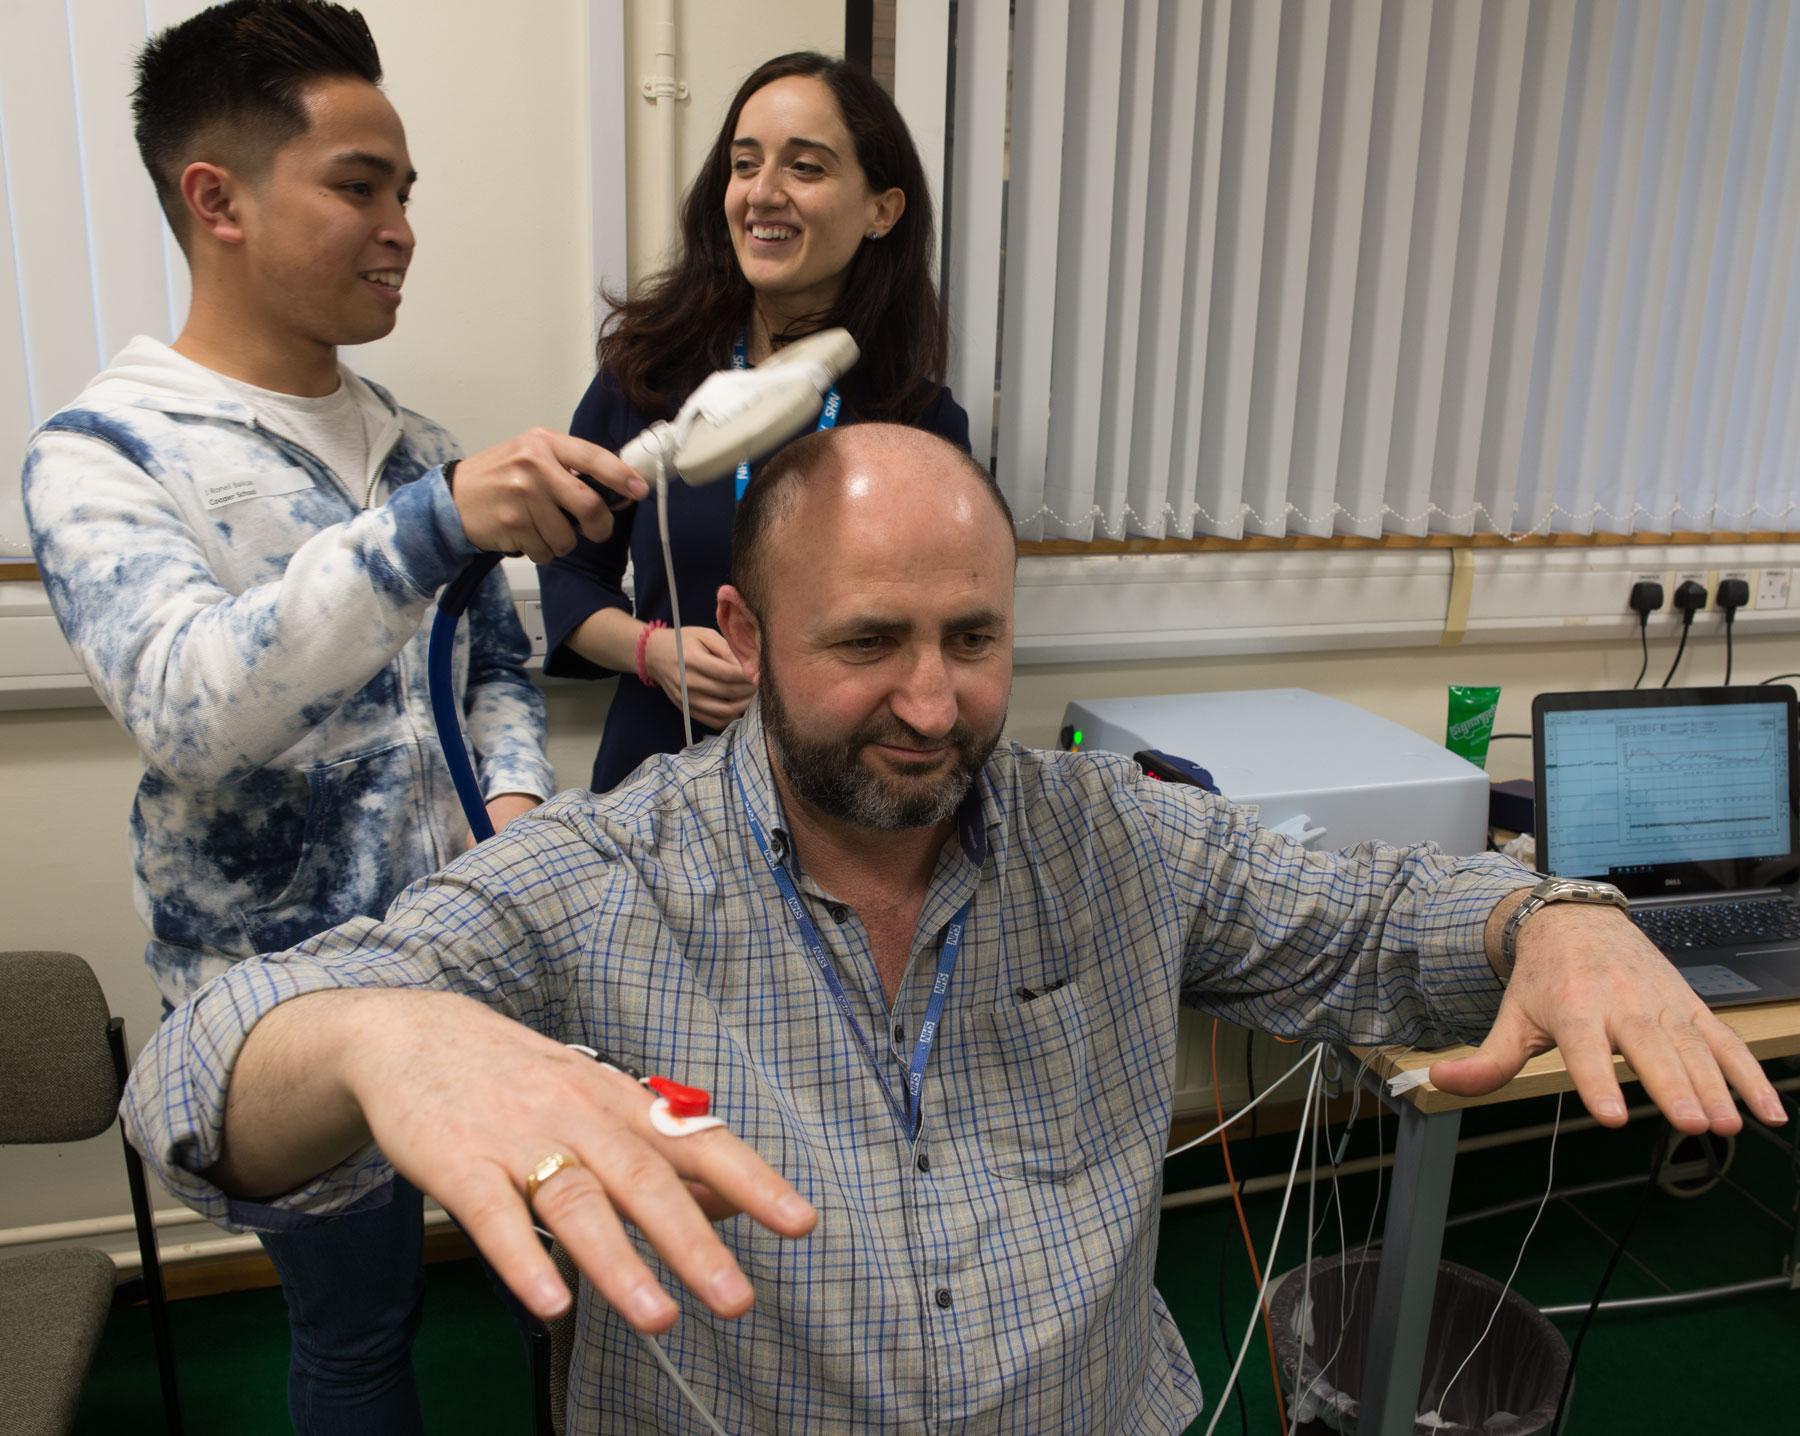 Schools Open Day 2018 at the MRC Brain Network Dynamics Unit is stimulating for the brain – in many ways!